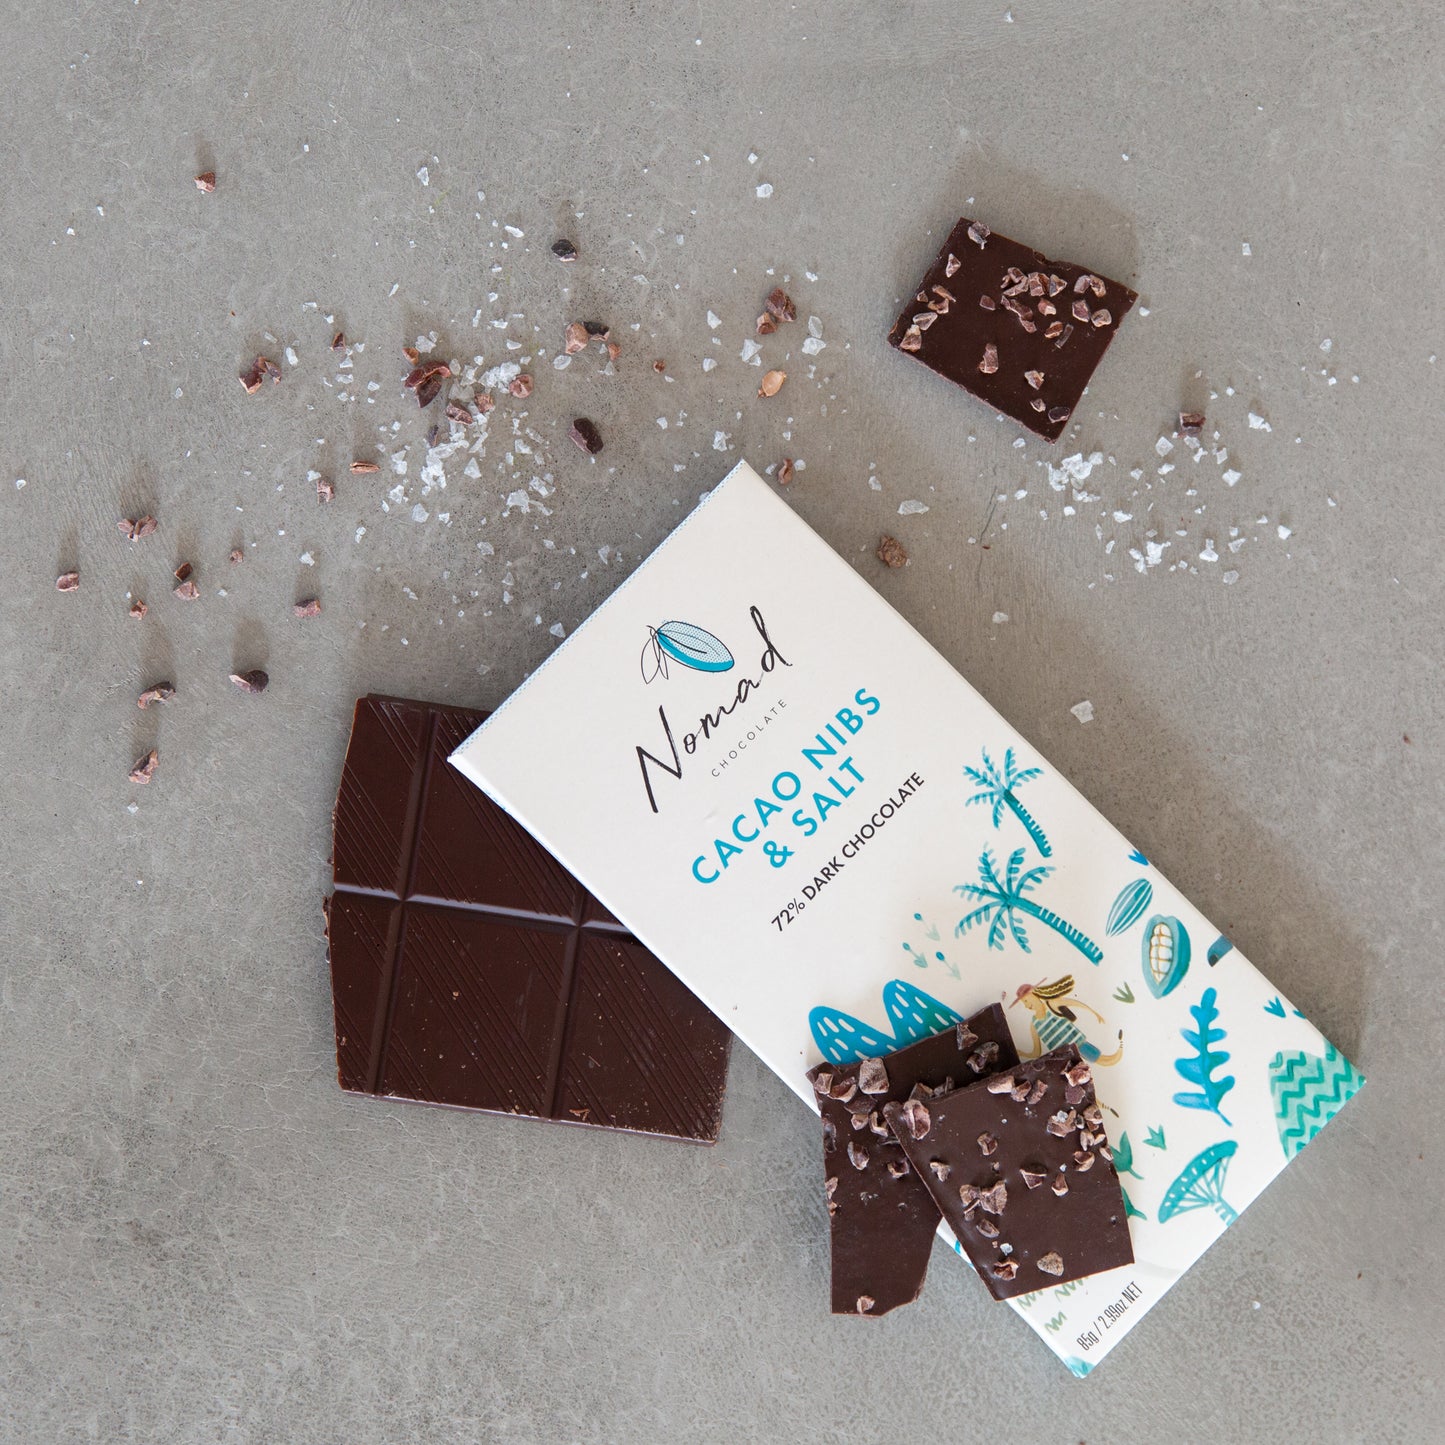 Cacao Nibs & Salt 72% Dark Chocolate made by "Nomad"